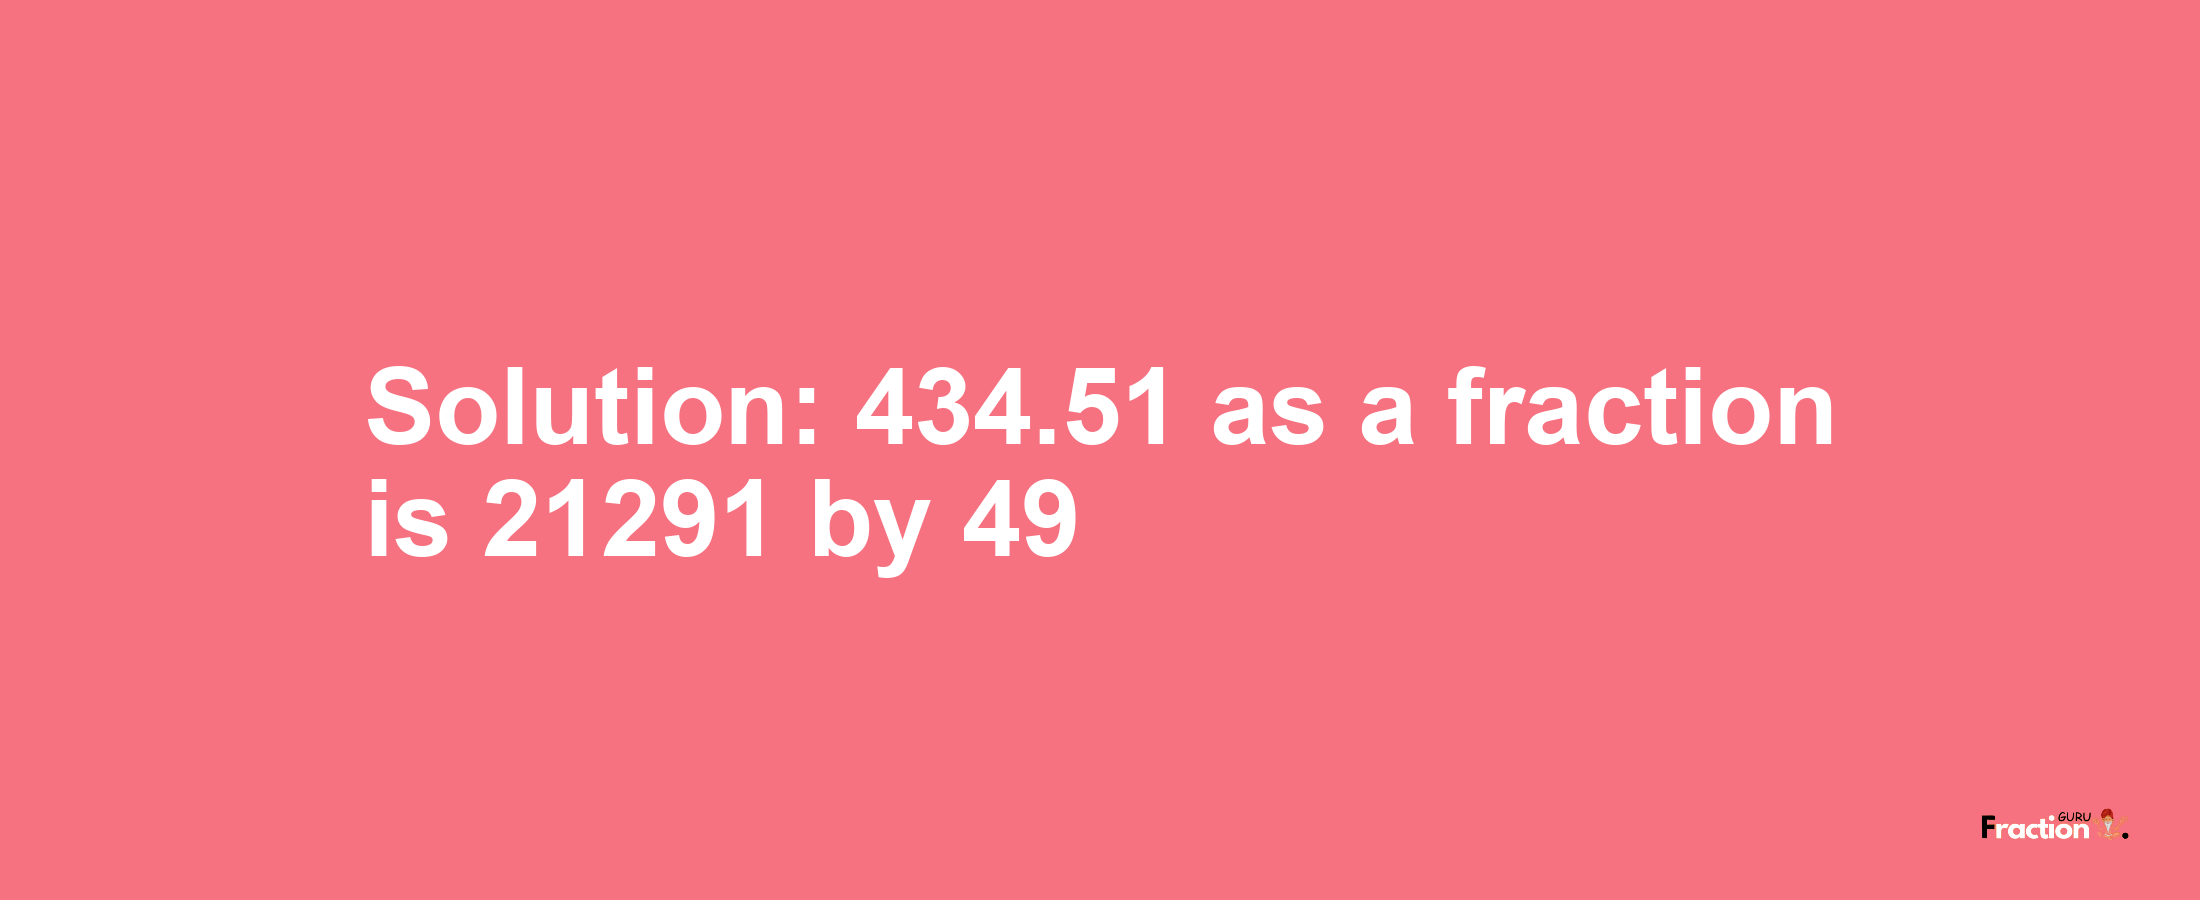 Solution:434.51 as a fraction is 21291/49